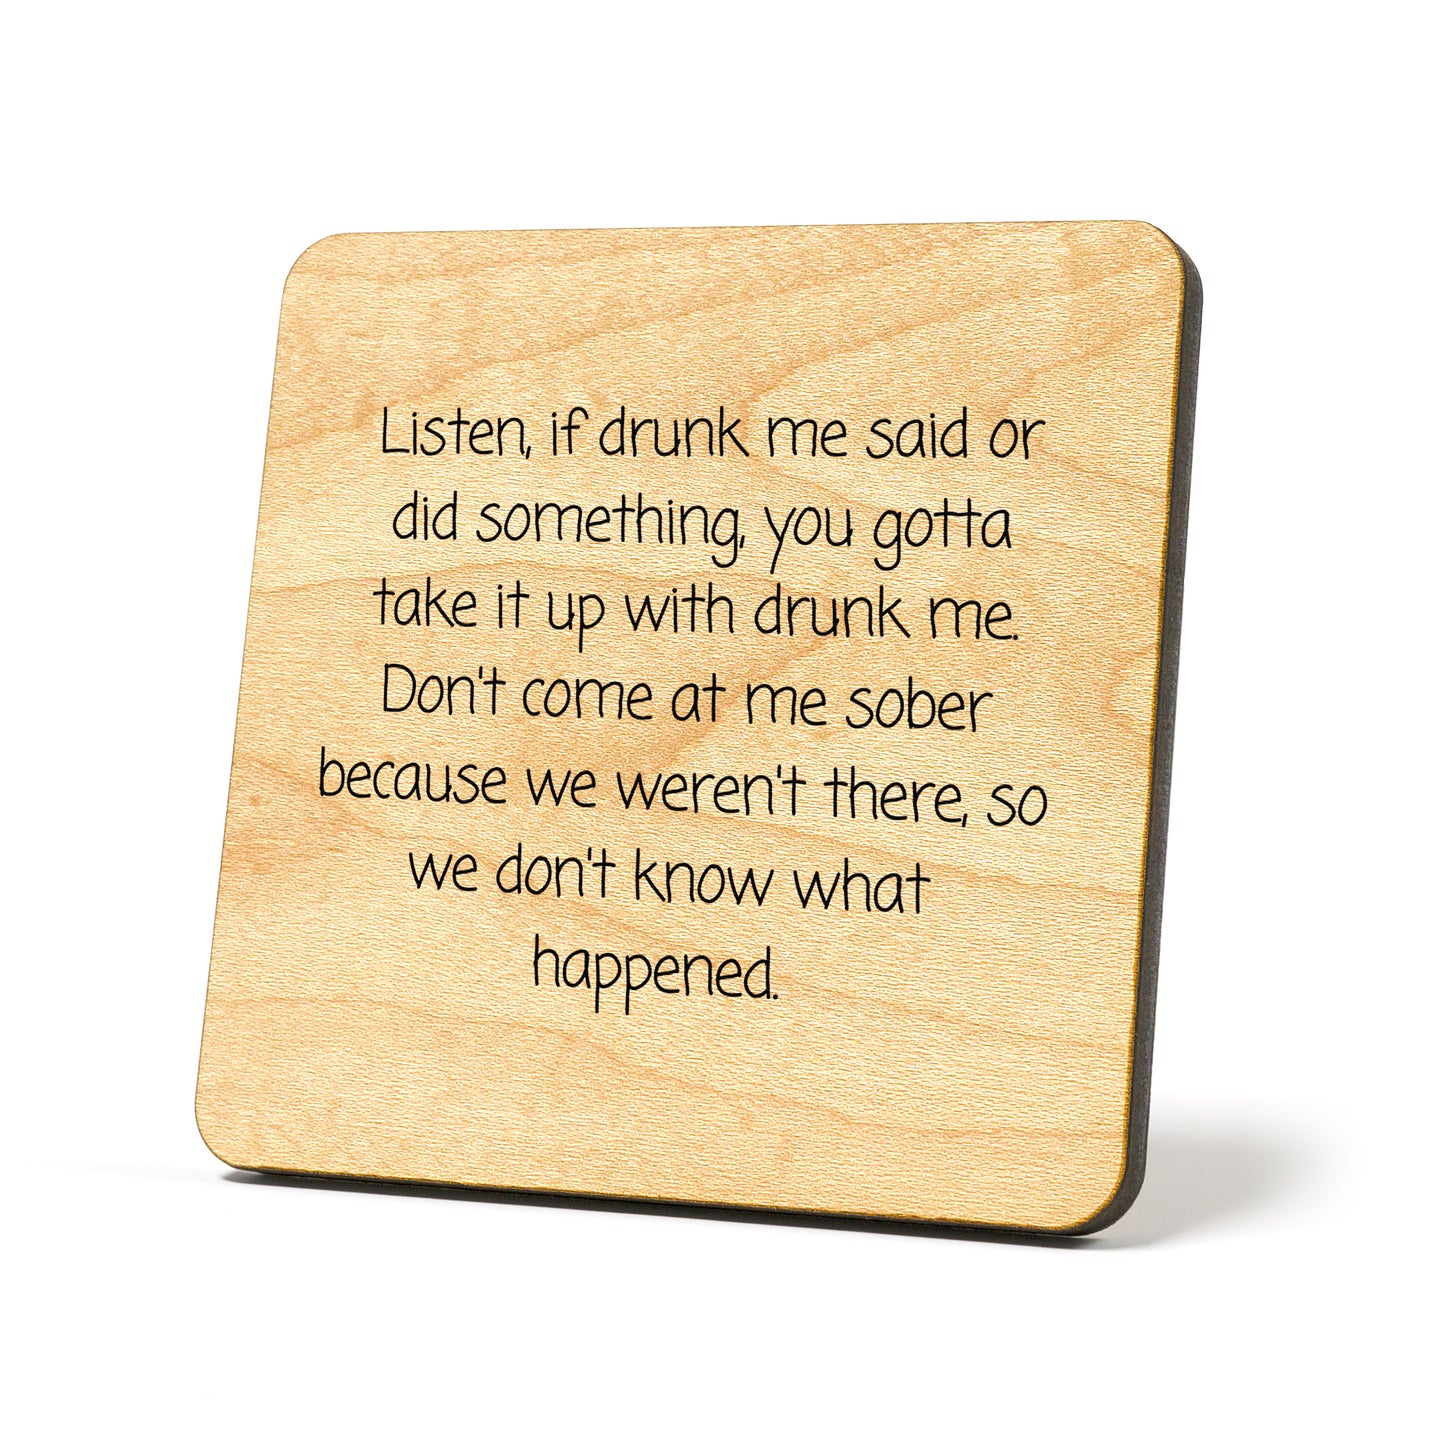 If drunk me said or did Quote Coaster